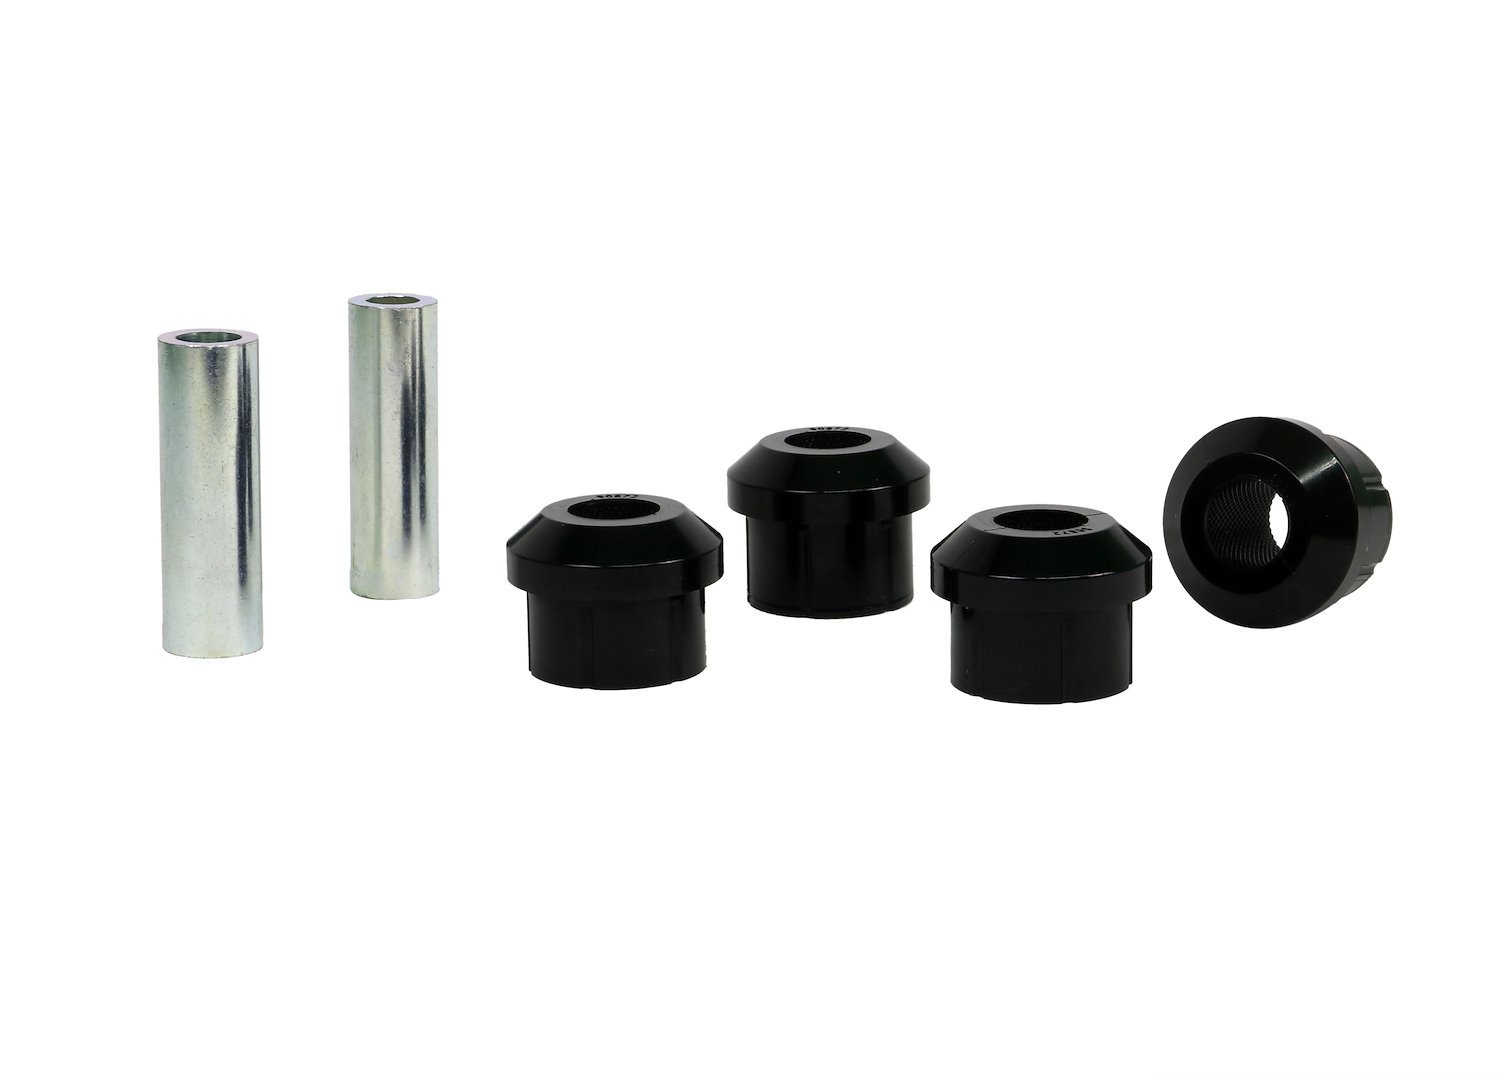 W53623 Front Control Arm Lower Inner Front Bushing Kit for 2006-2013 Lexus IS250, 2008-2013 Lexus IS350